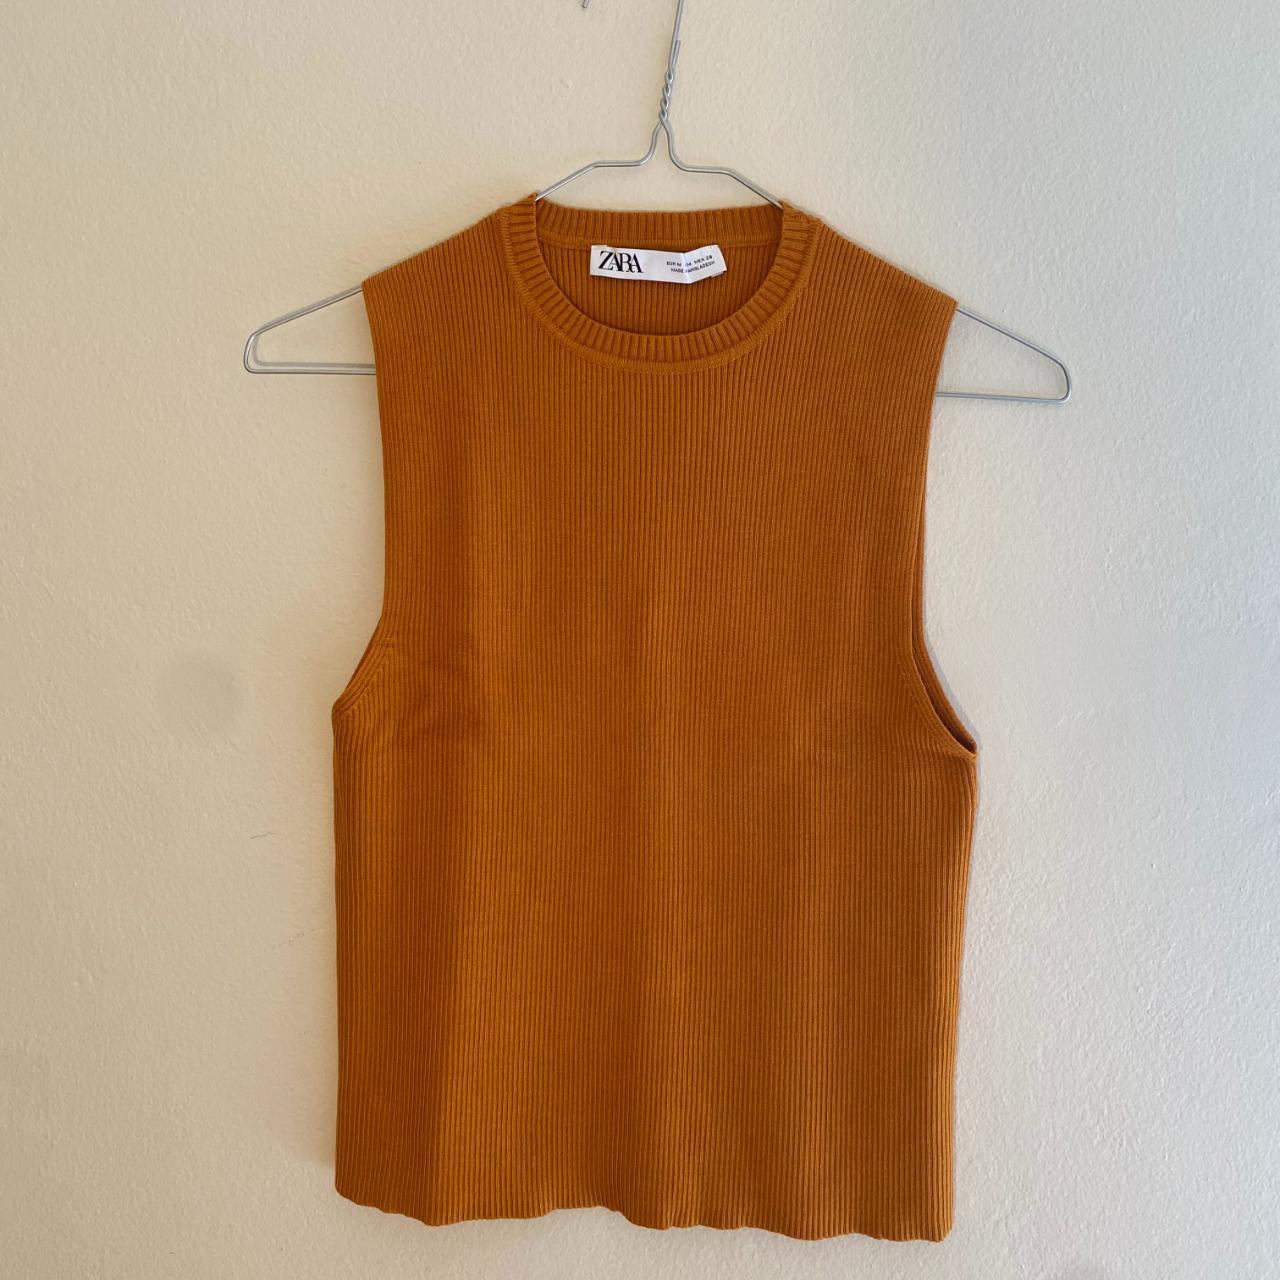 Selling an orange knitted Zara top sized M. The top... - Depop